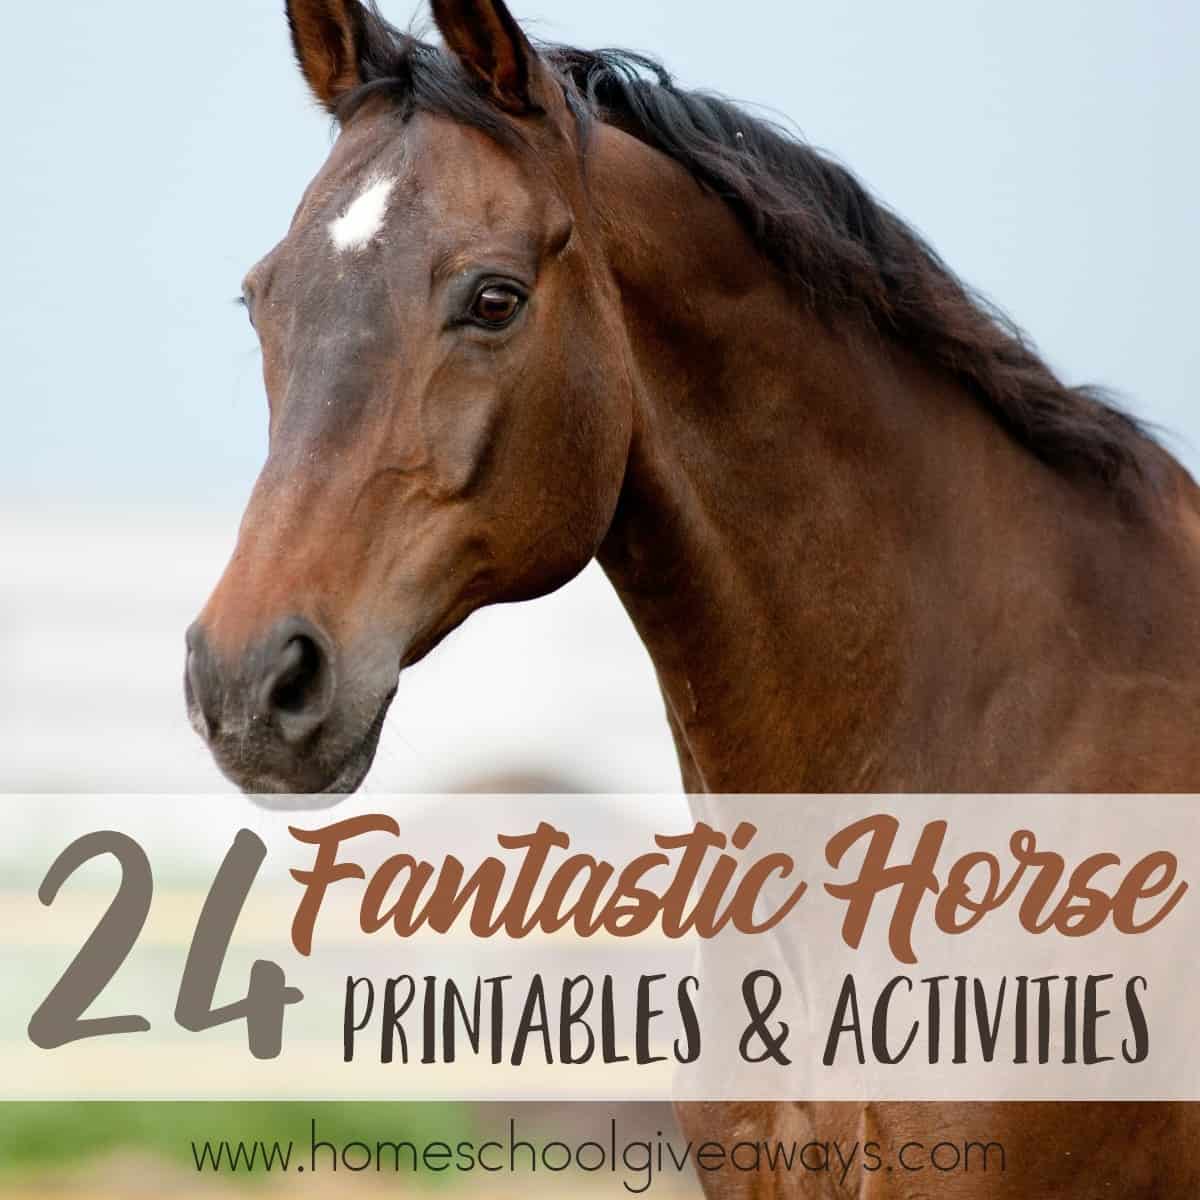 Whether your children love horses, want to learn about them or you're working through a series on farm animals, these Horse printables and activities are perfect! :: www.homeschooolgiveaways.com